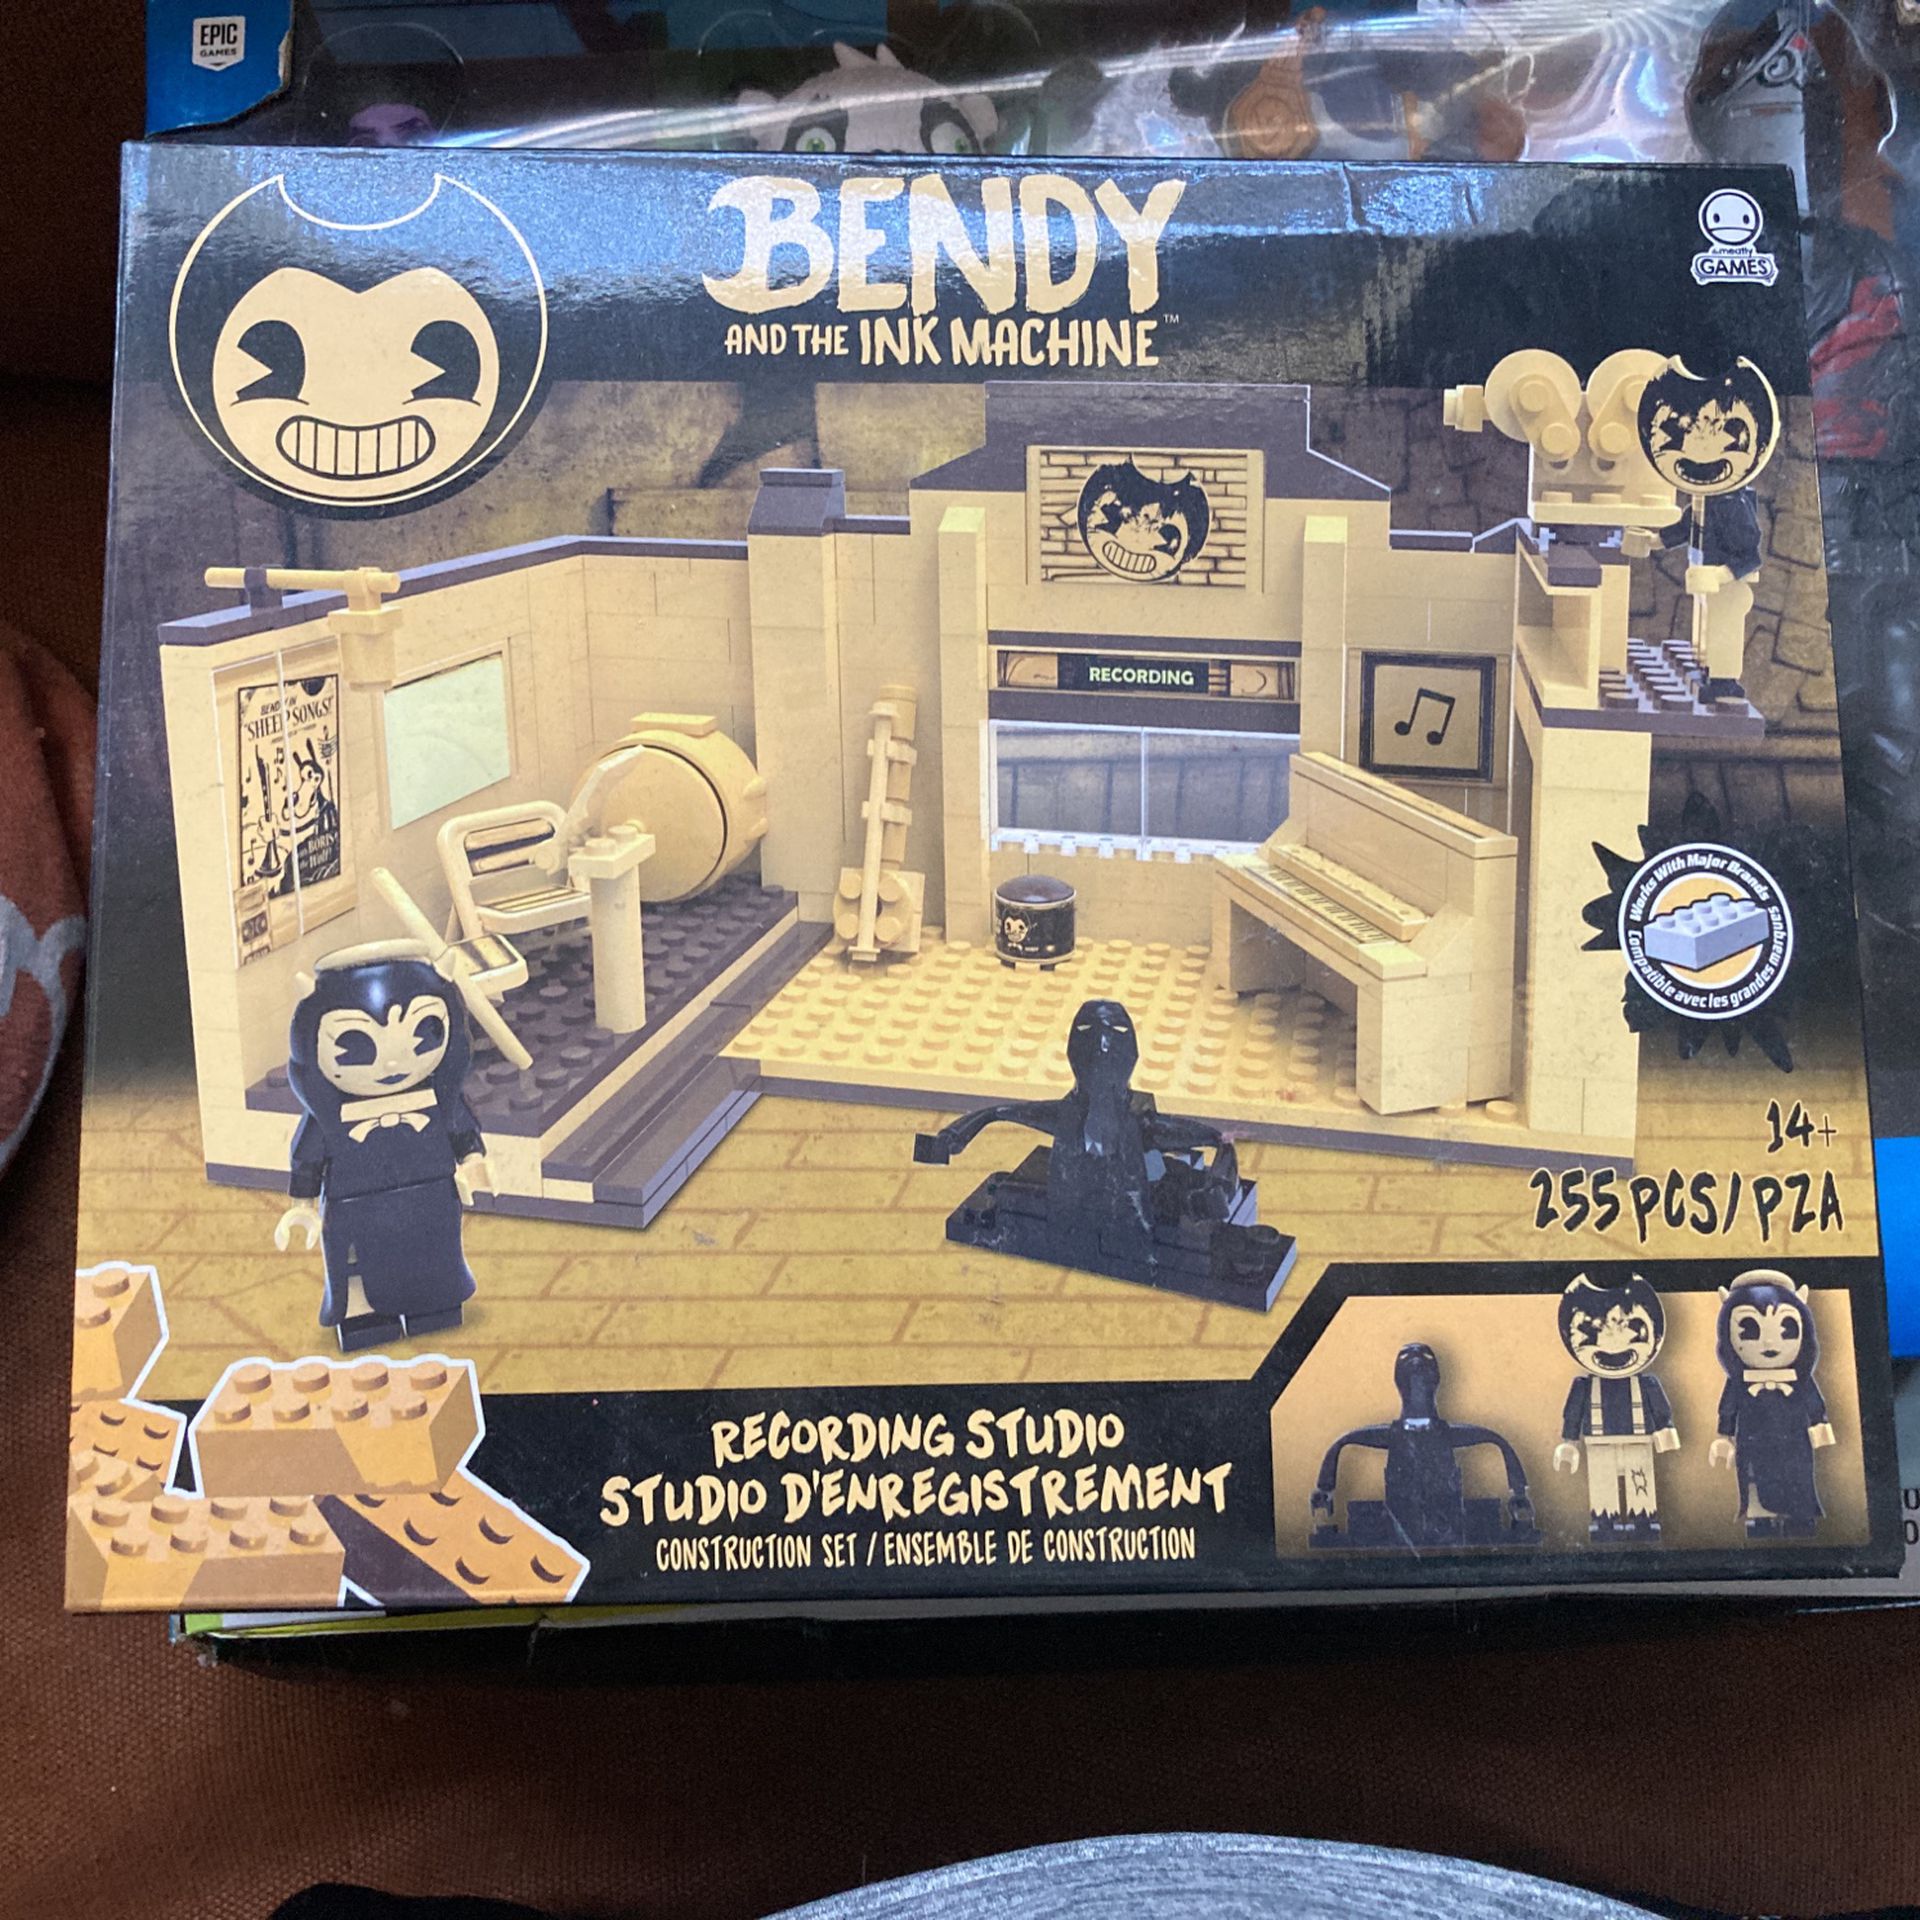 Bendy And The Ink Machine Lego Set Sale in TX - OfferUp